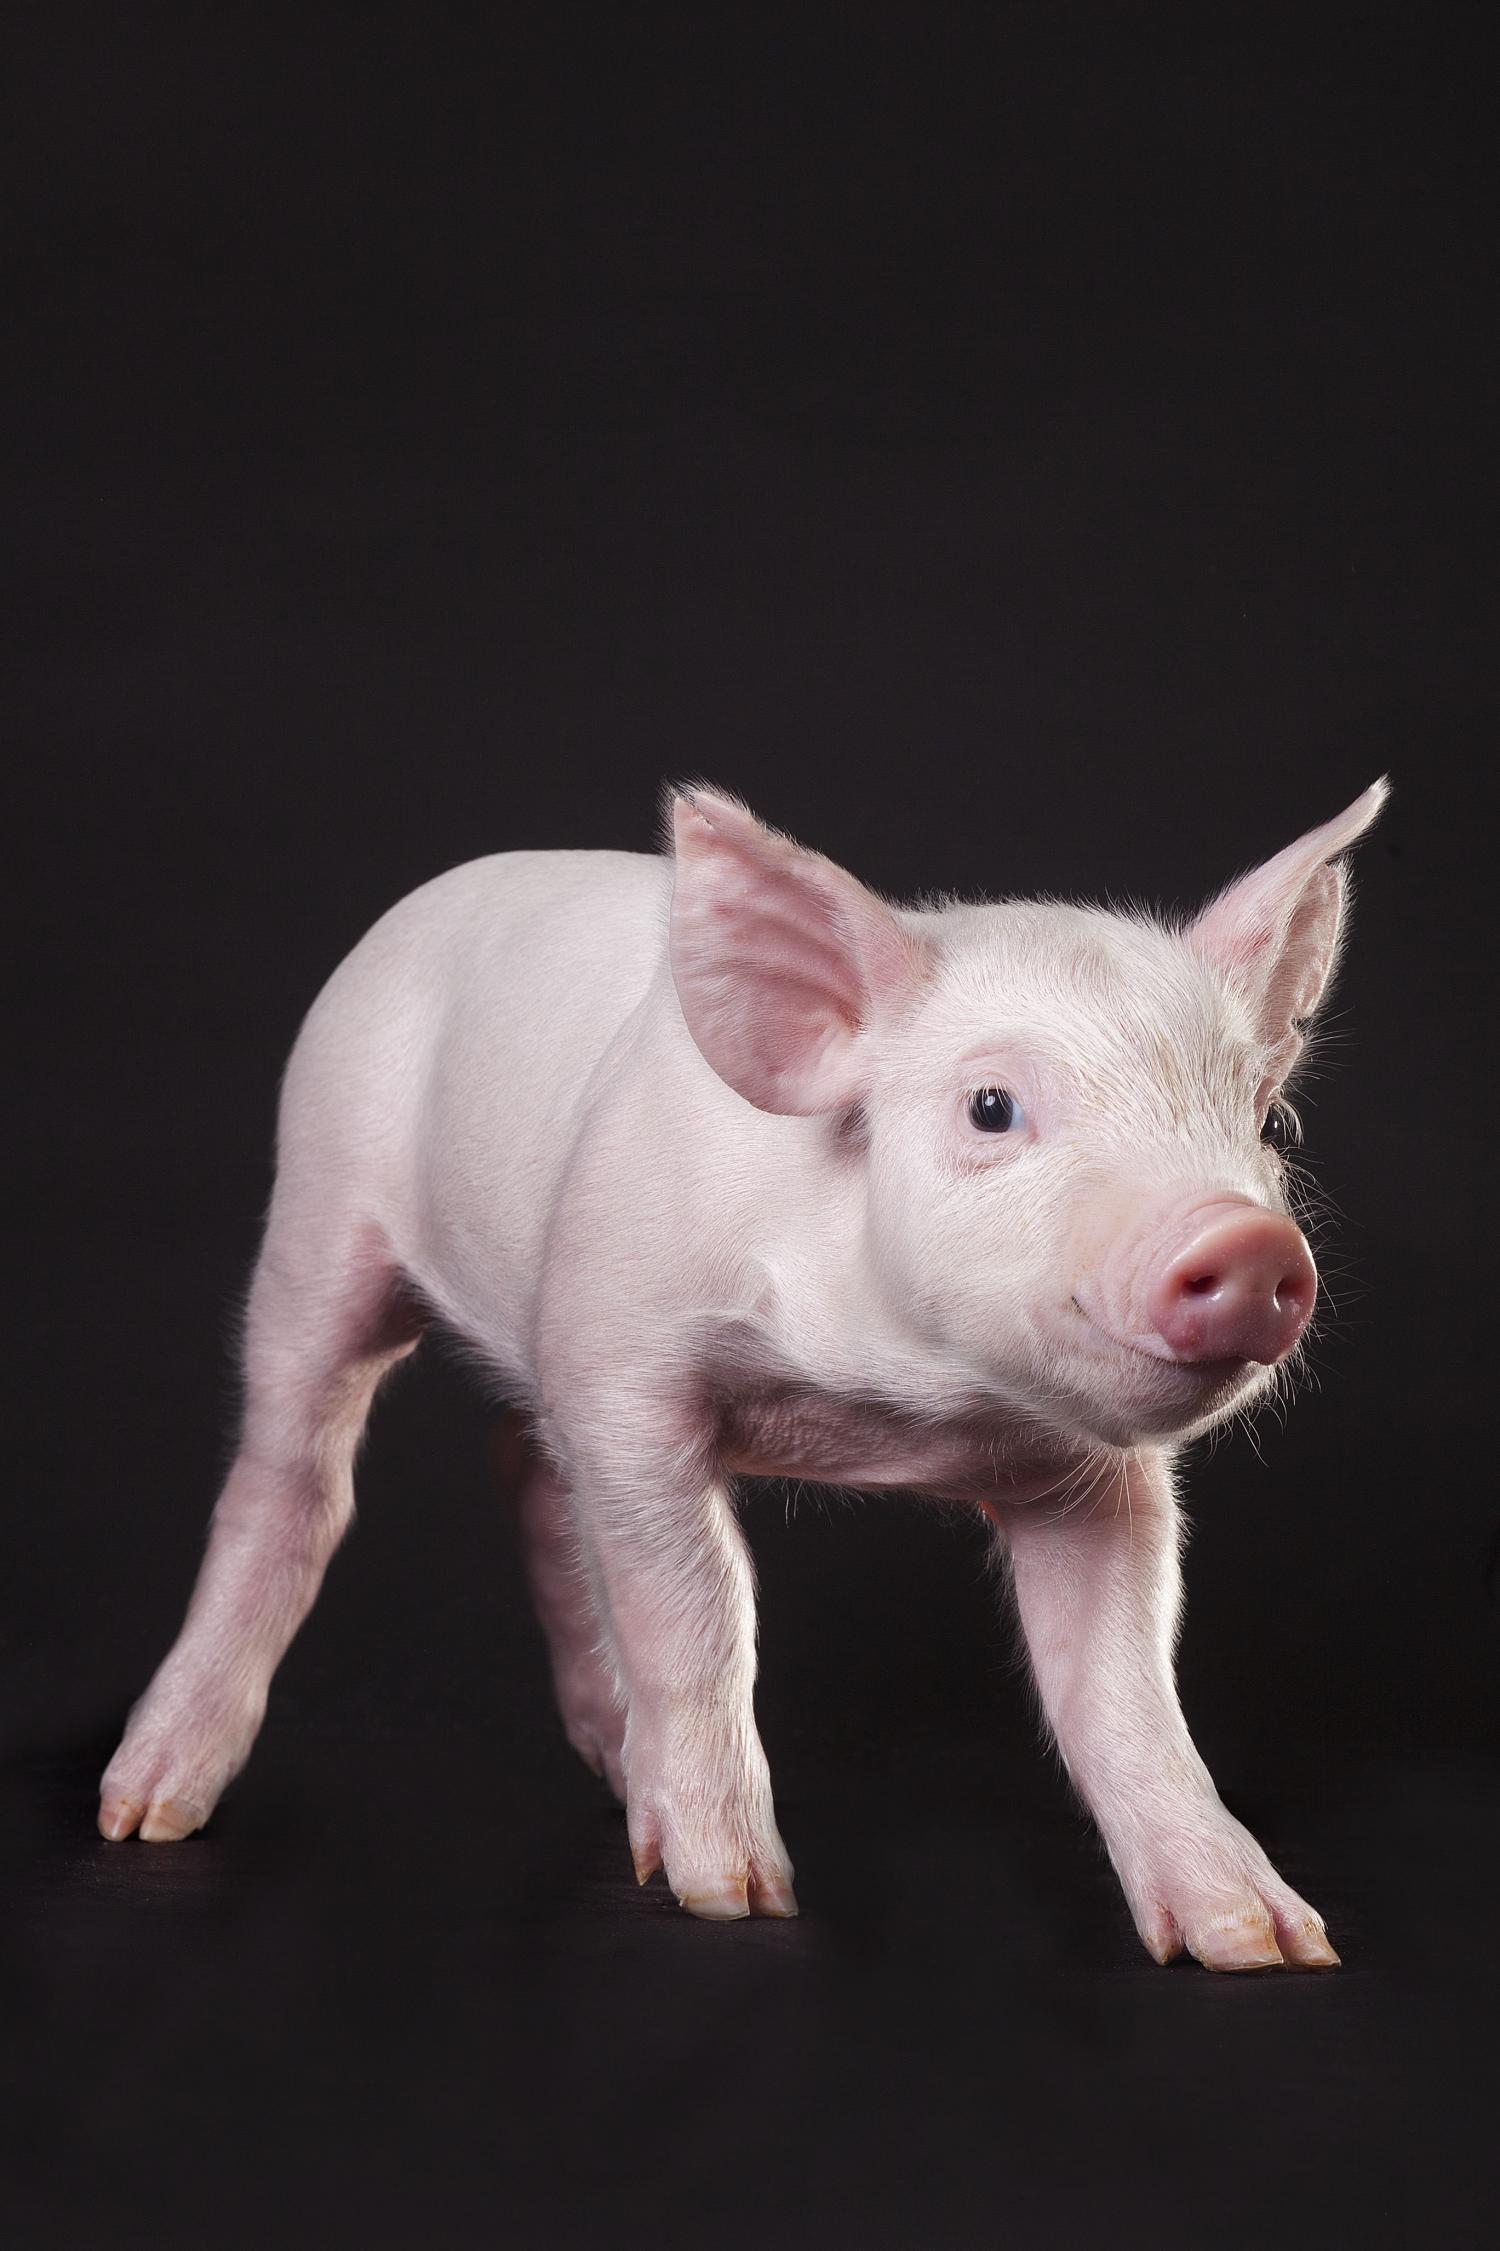 Pigs that are resistant to incurable disease developed